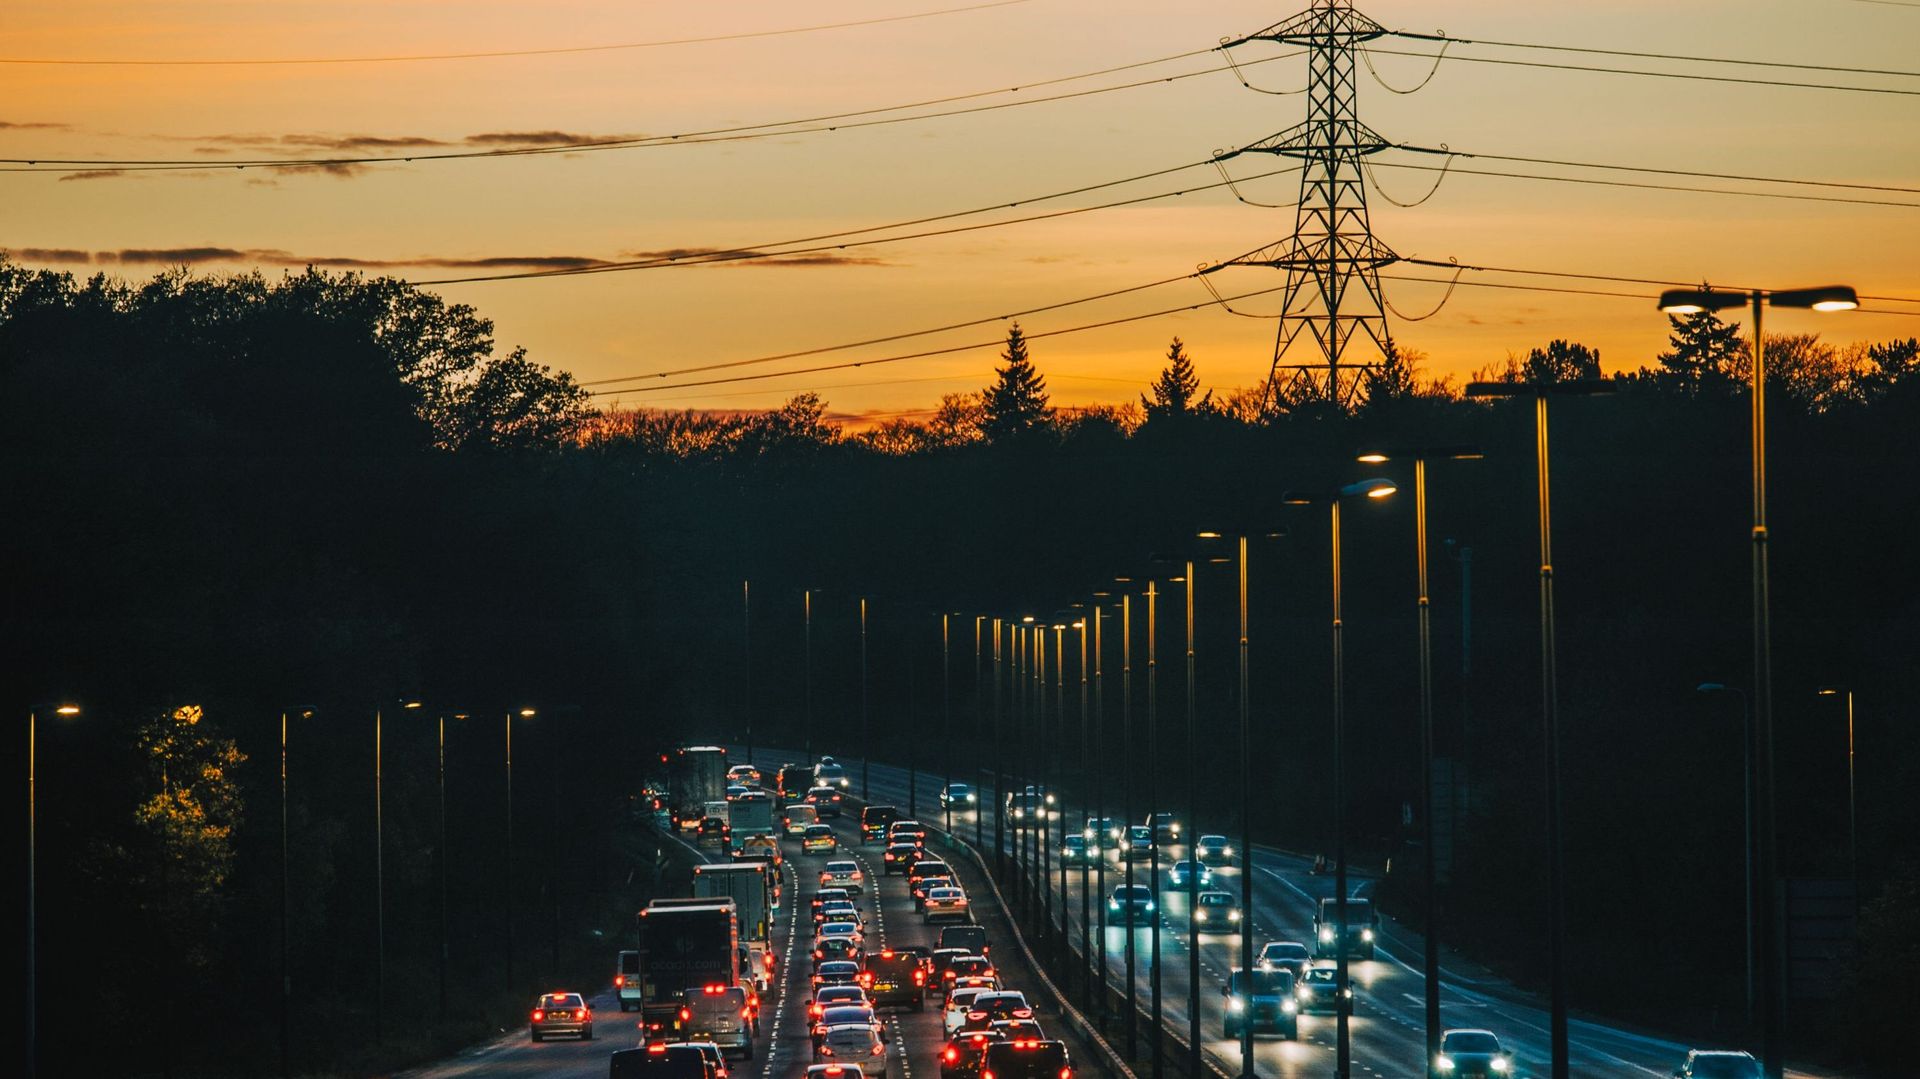 An aerial sunset view of a UK multi-lane highway - stock photo